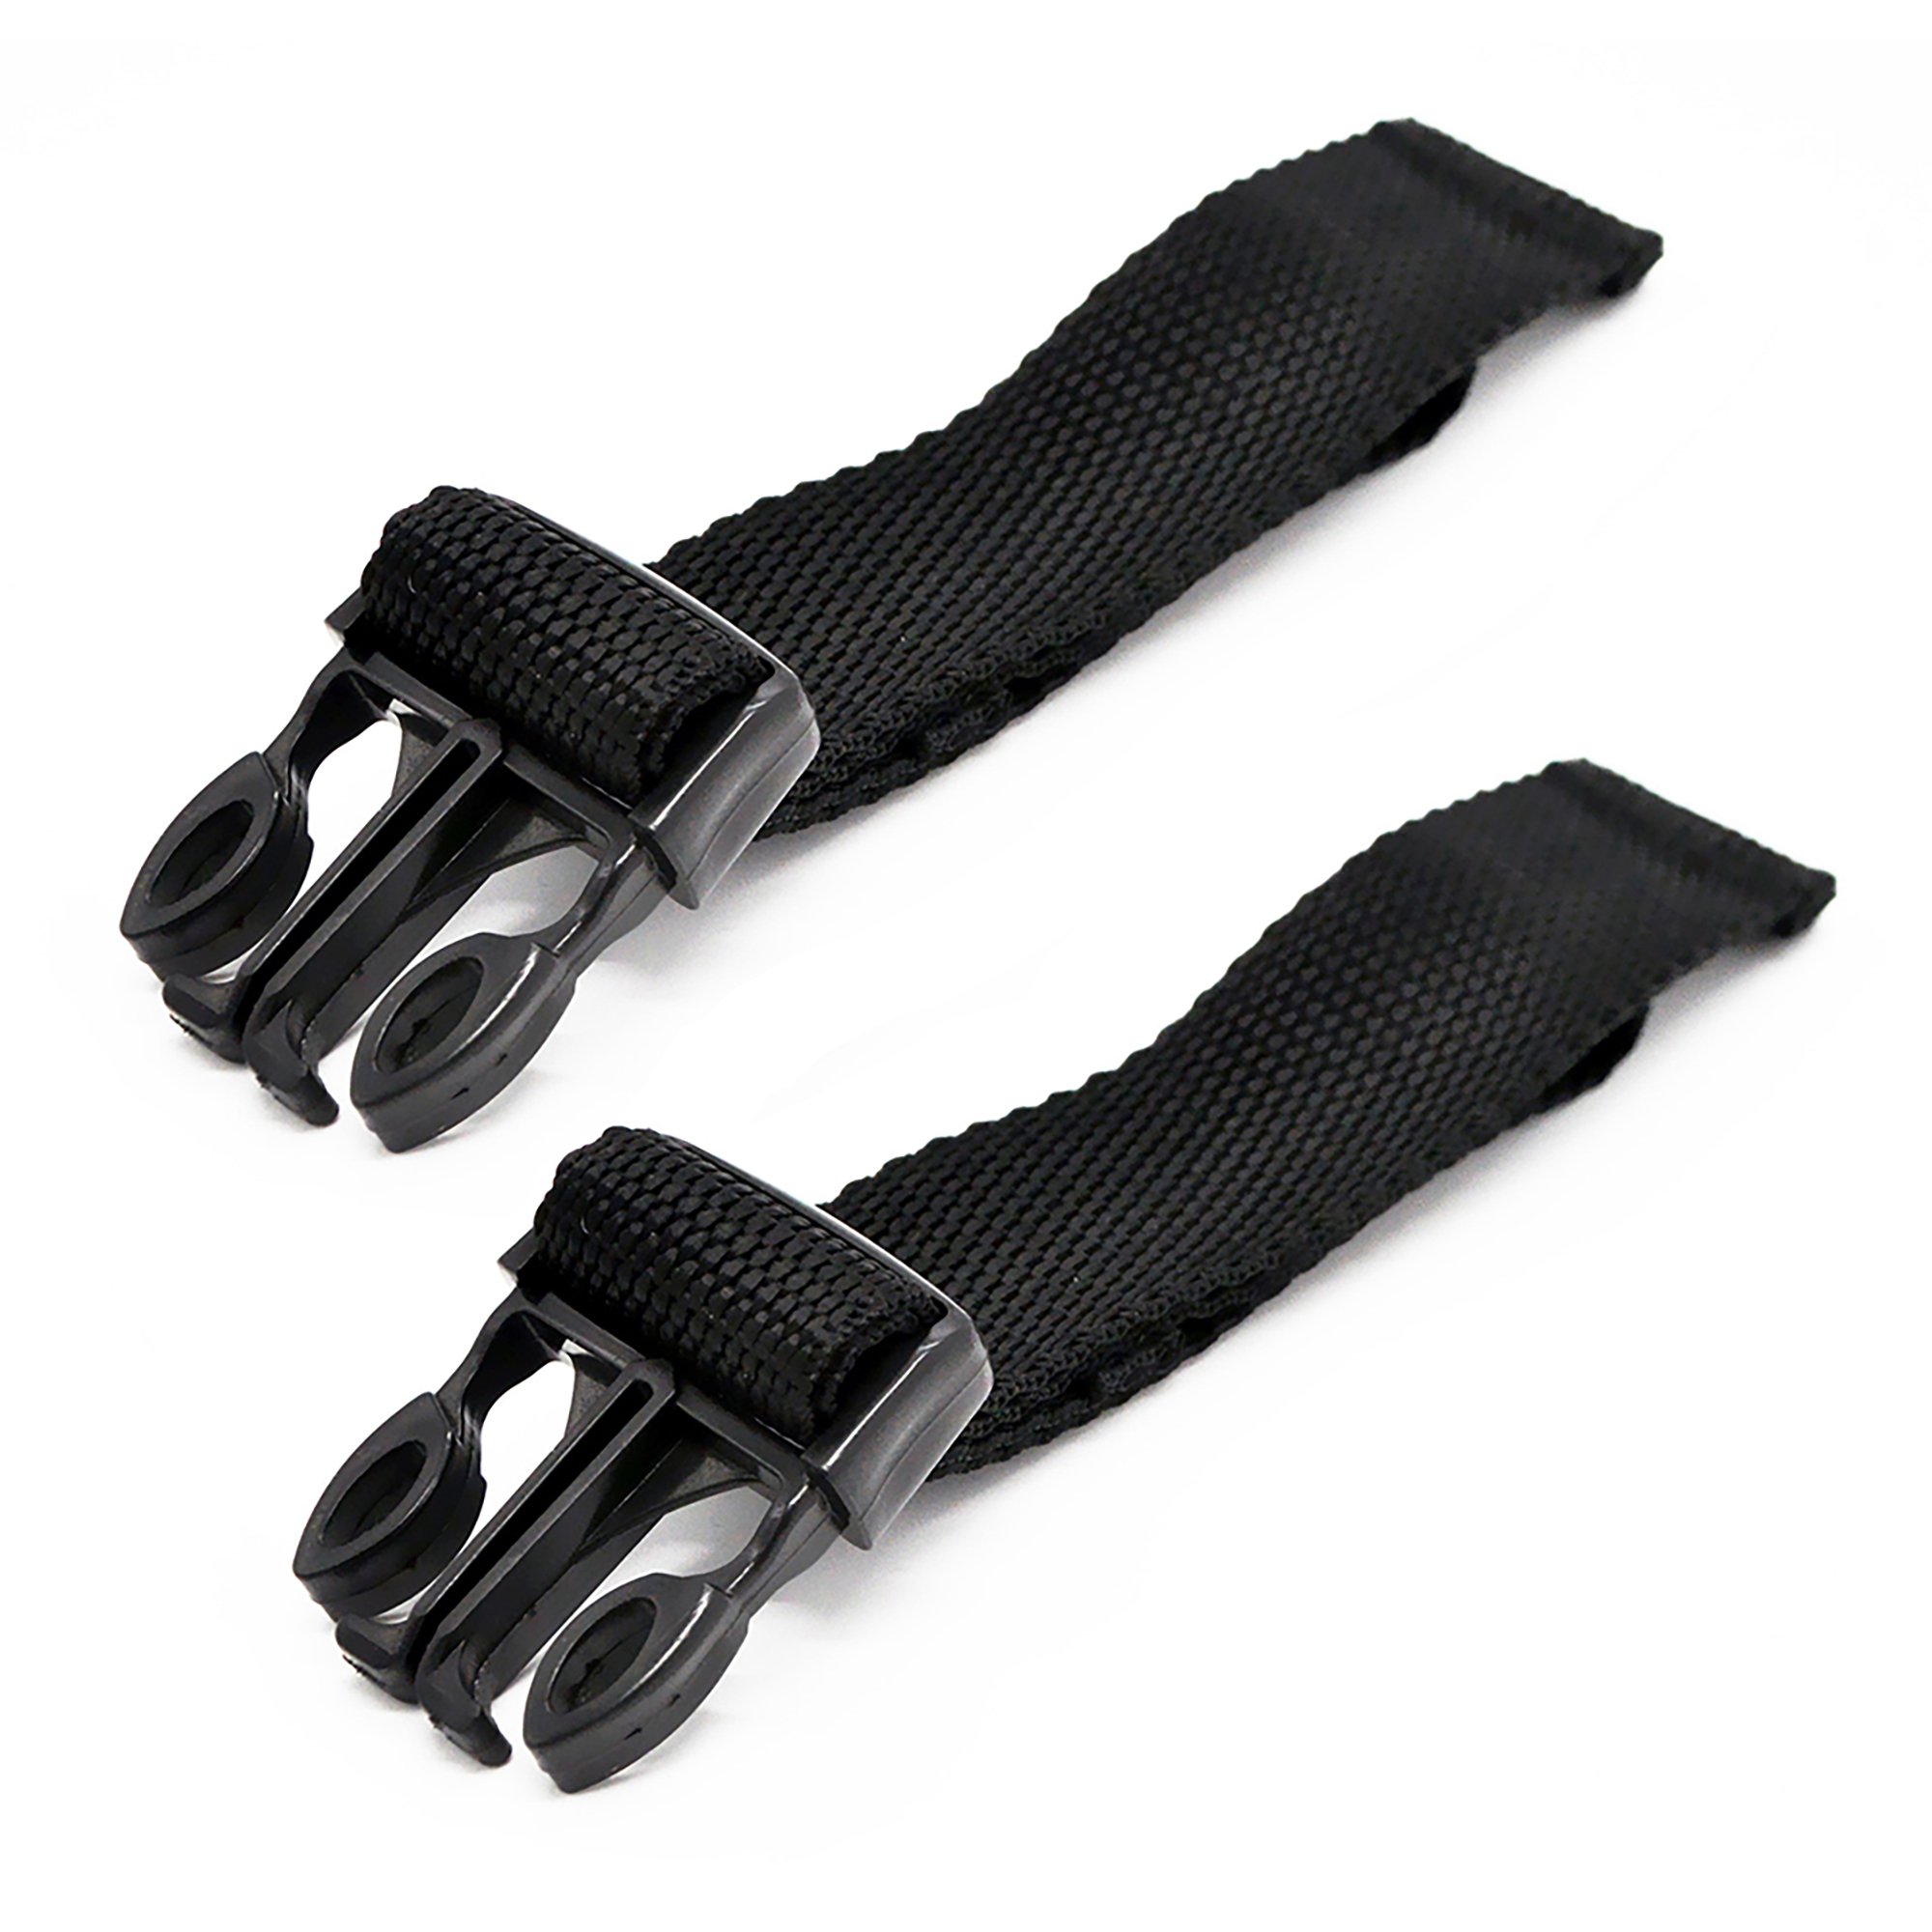 For T3 - Buckle Strap - Male End, 2 Sets